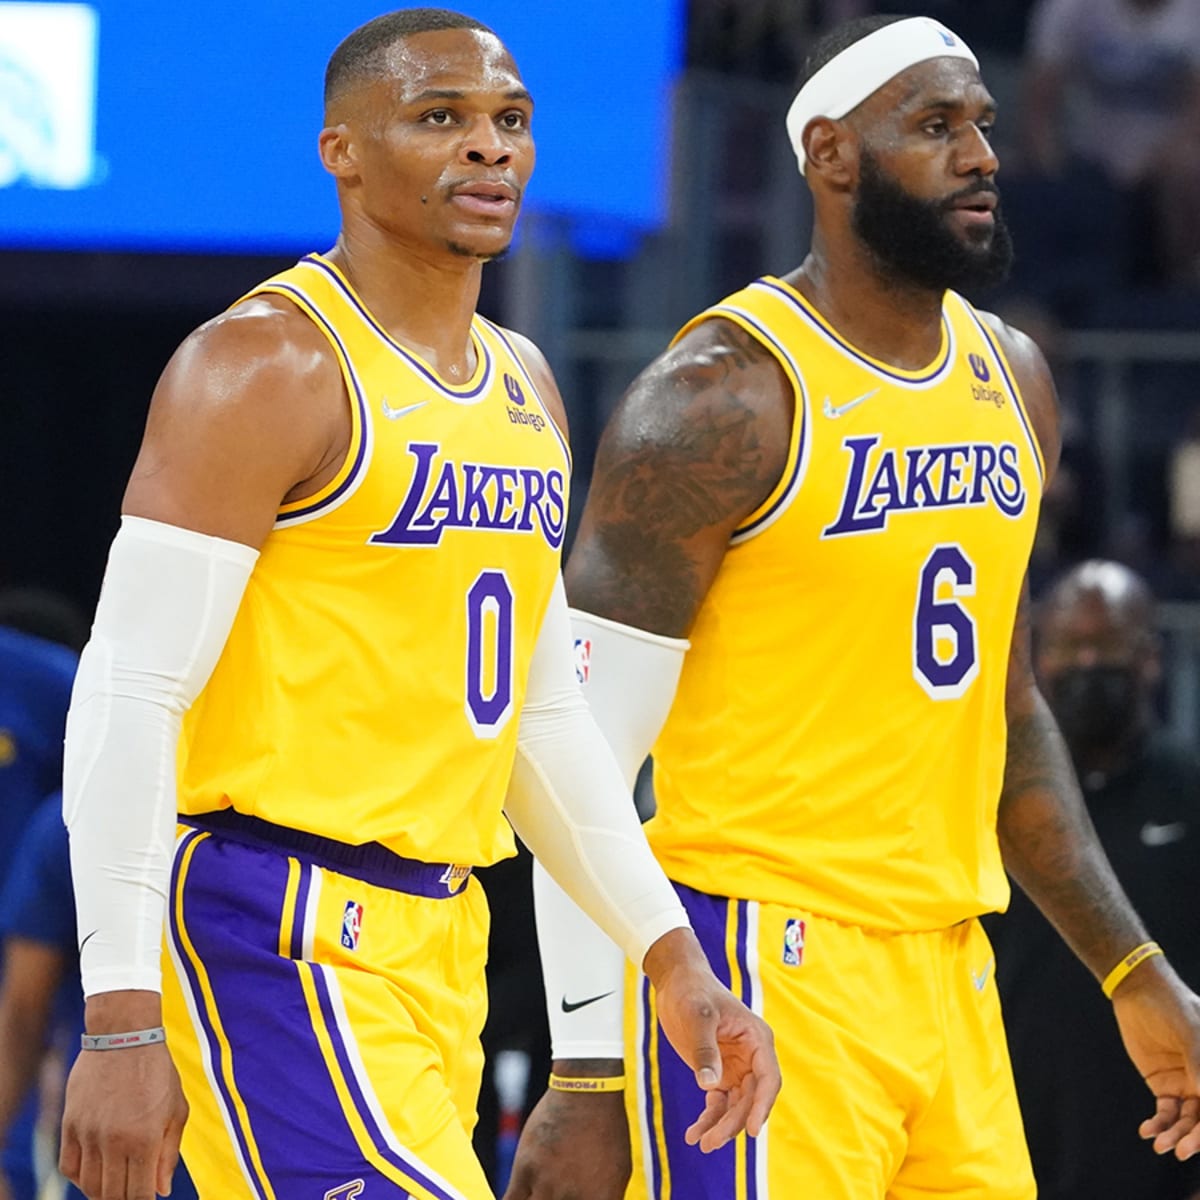 LeBron James, Lakers should not be judged early - Sports Illustrated